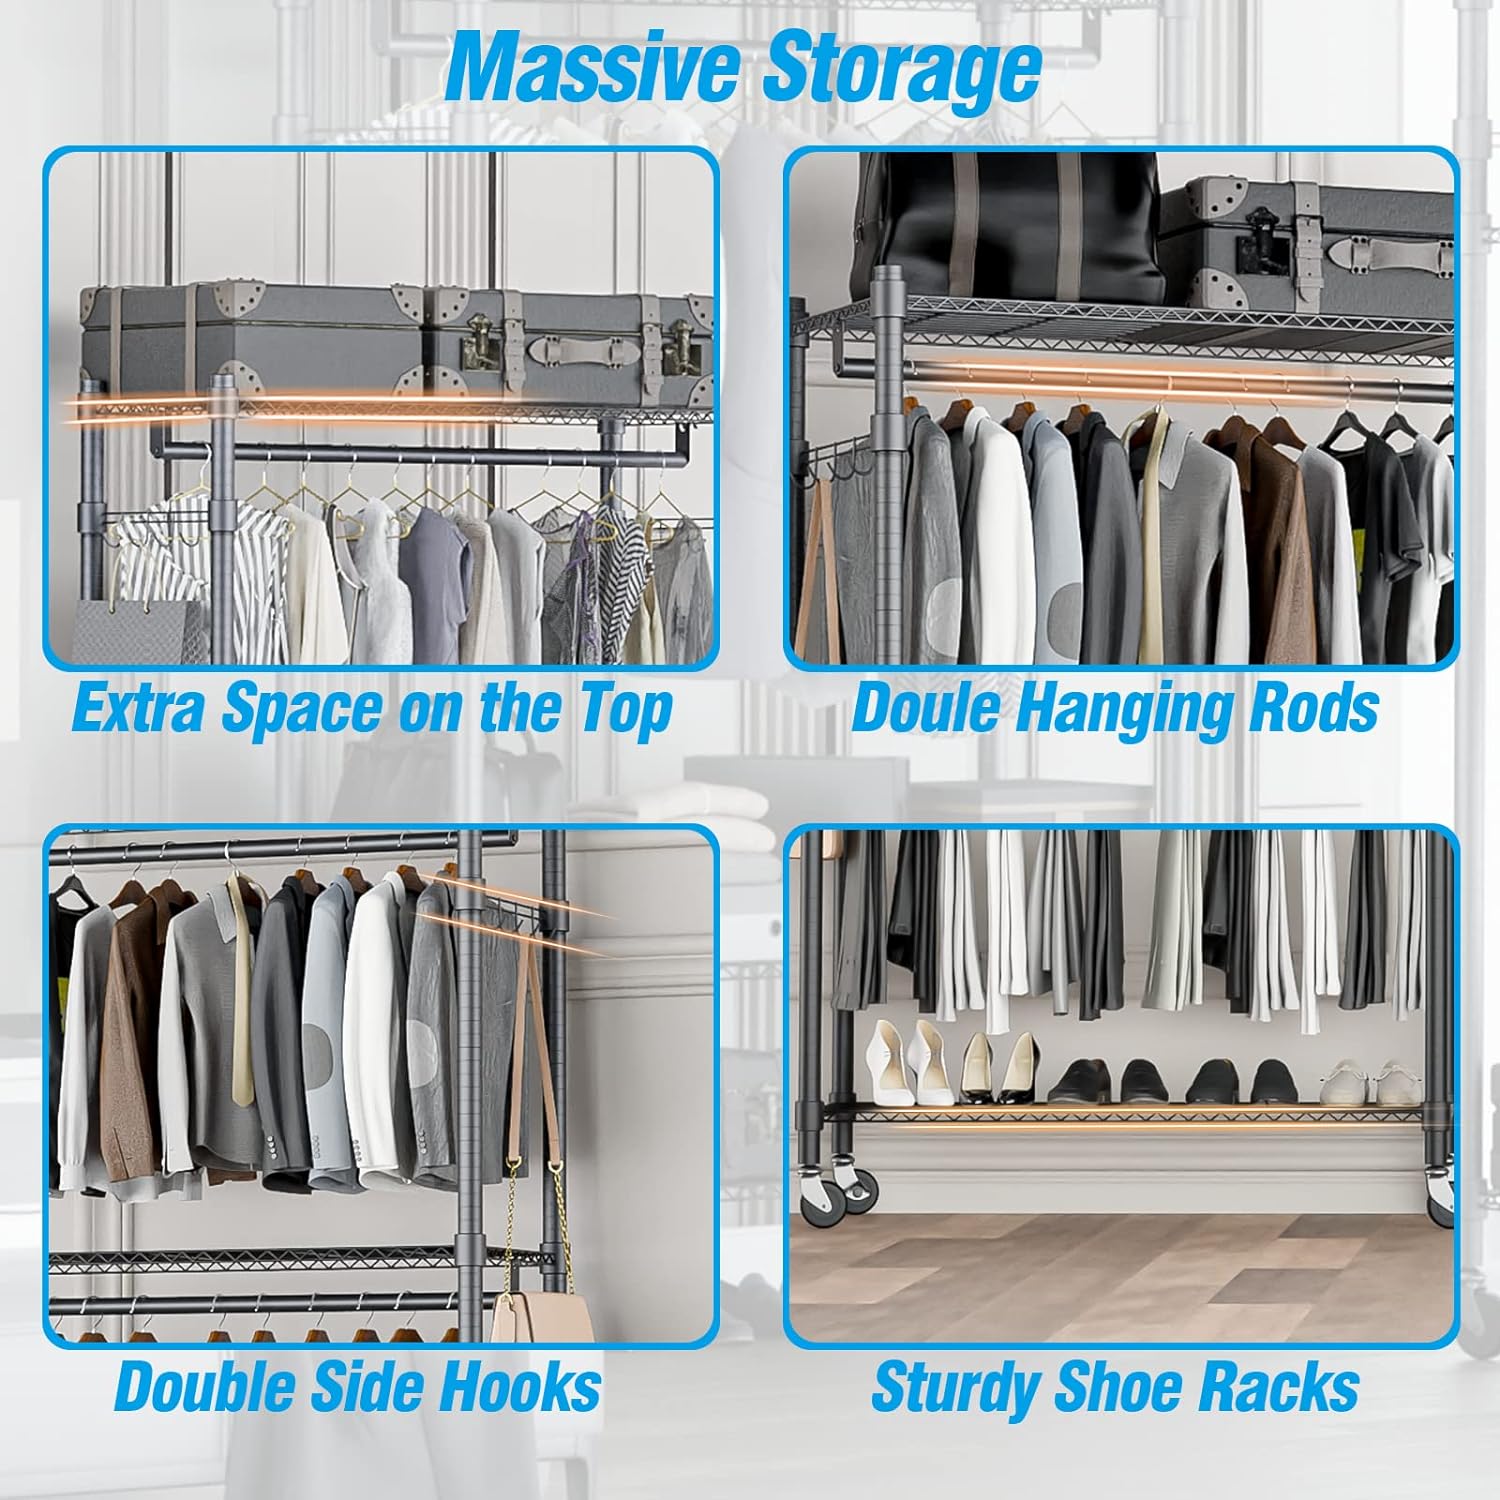 https://bigbigmart.com/wp-content/uploads/2023/11/Homdox-3-Shelves-Wire-Shelving-Clothing-Rolling-Rack-Heavy-Duty-Commercial-Grade-Garment-Rack-with-Wheels-and-Side-Hooks-One-Pair-Hook-and-Two-Hanging-Rods-Gray6.jpg